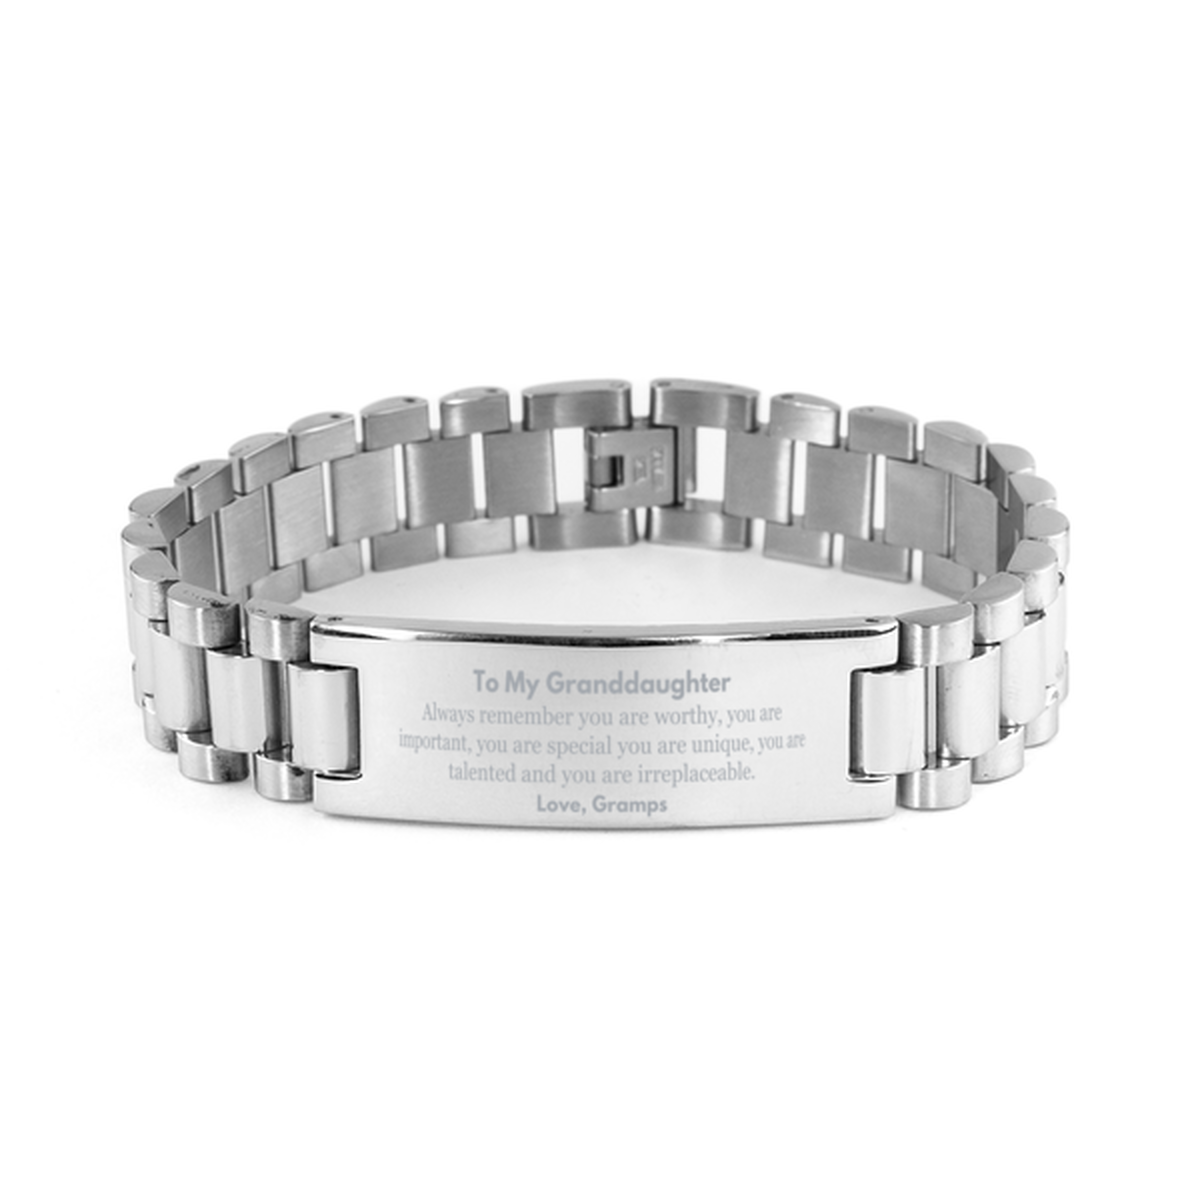 Granddaughter Birthday Gifts from Gramps, Inspirational Ladder Stainless Steel Bracelet for Granddaughter Christmas Graduation Gifts for Granddaughter Always remember you are worthy, you are important. Love, Gramps